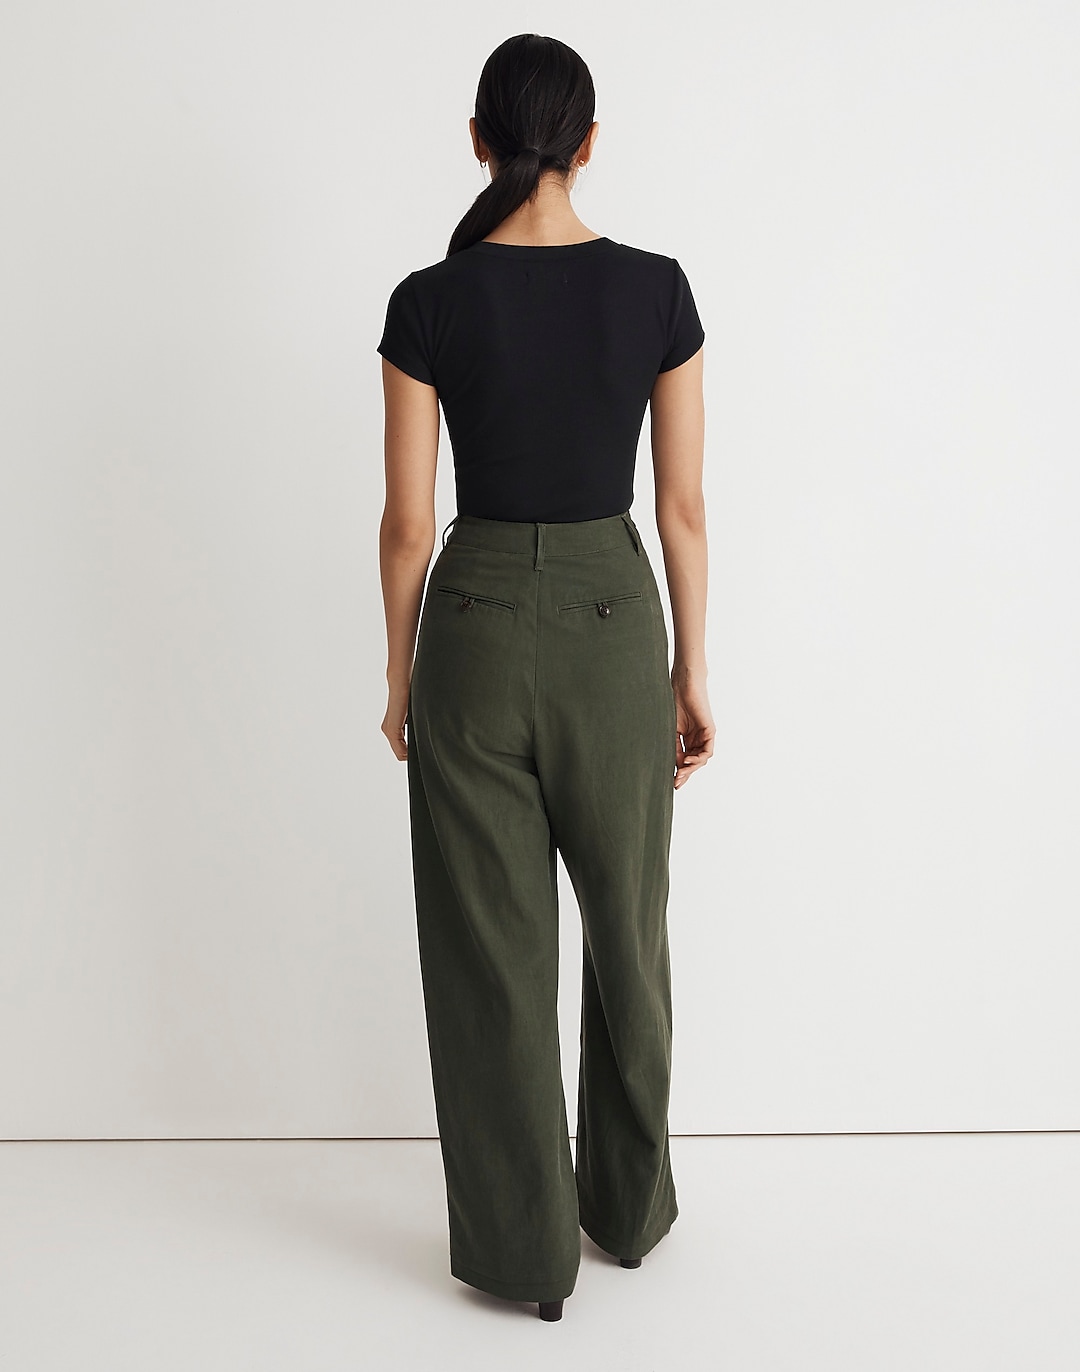 These Madewell Trousers Are the Only Real Pants I'll Wear While Traveling